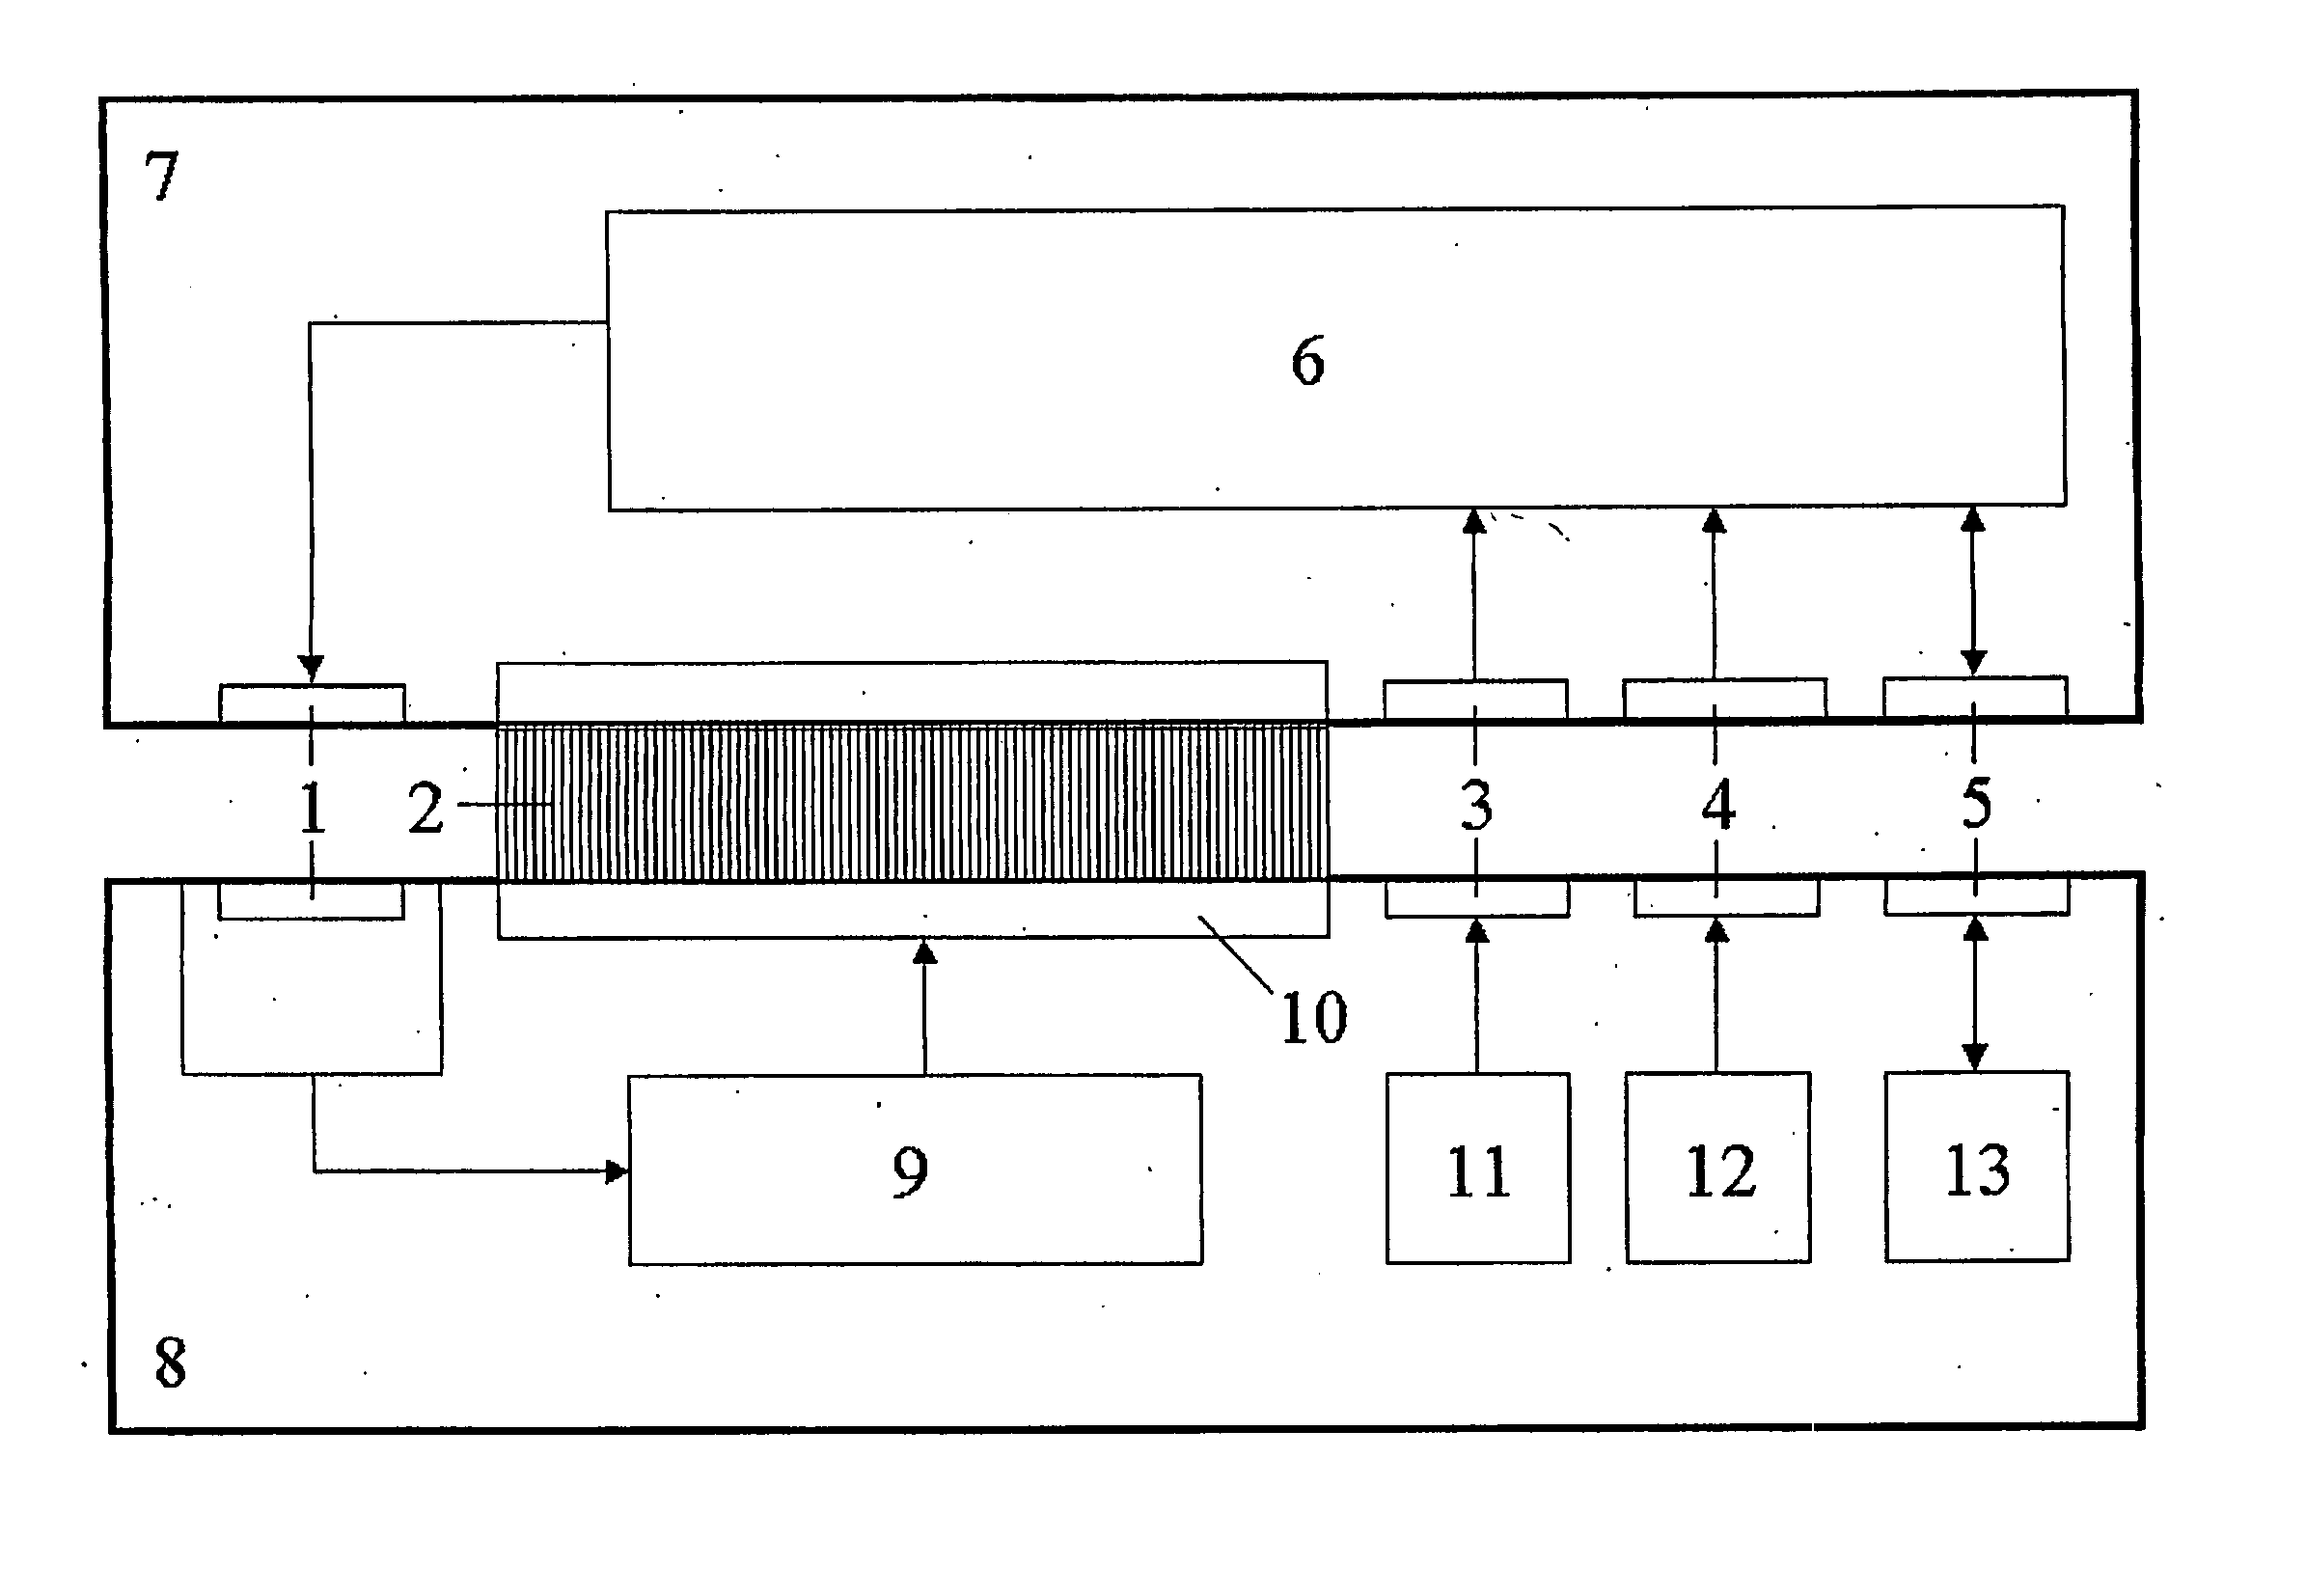 Linear motor with progressive motion control